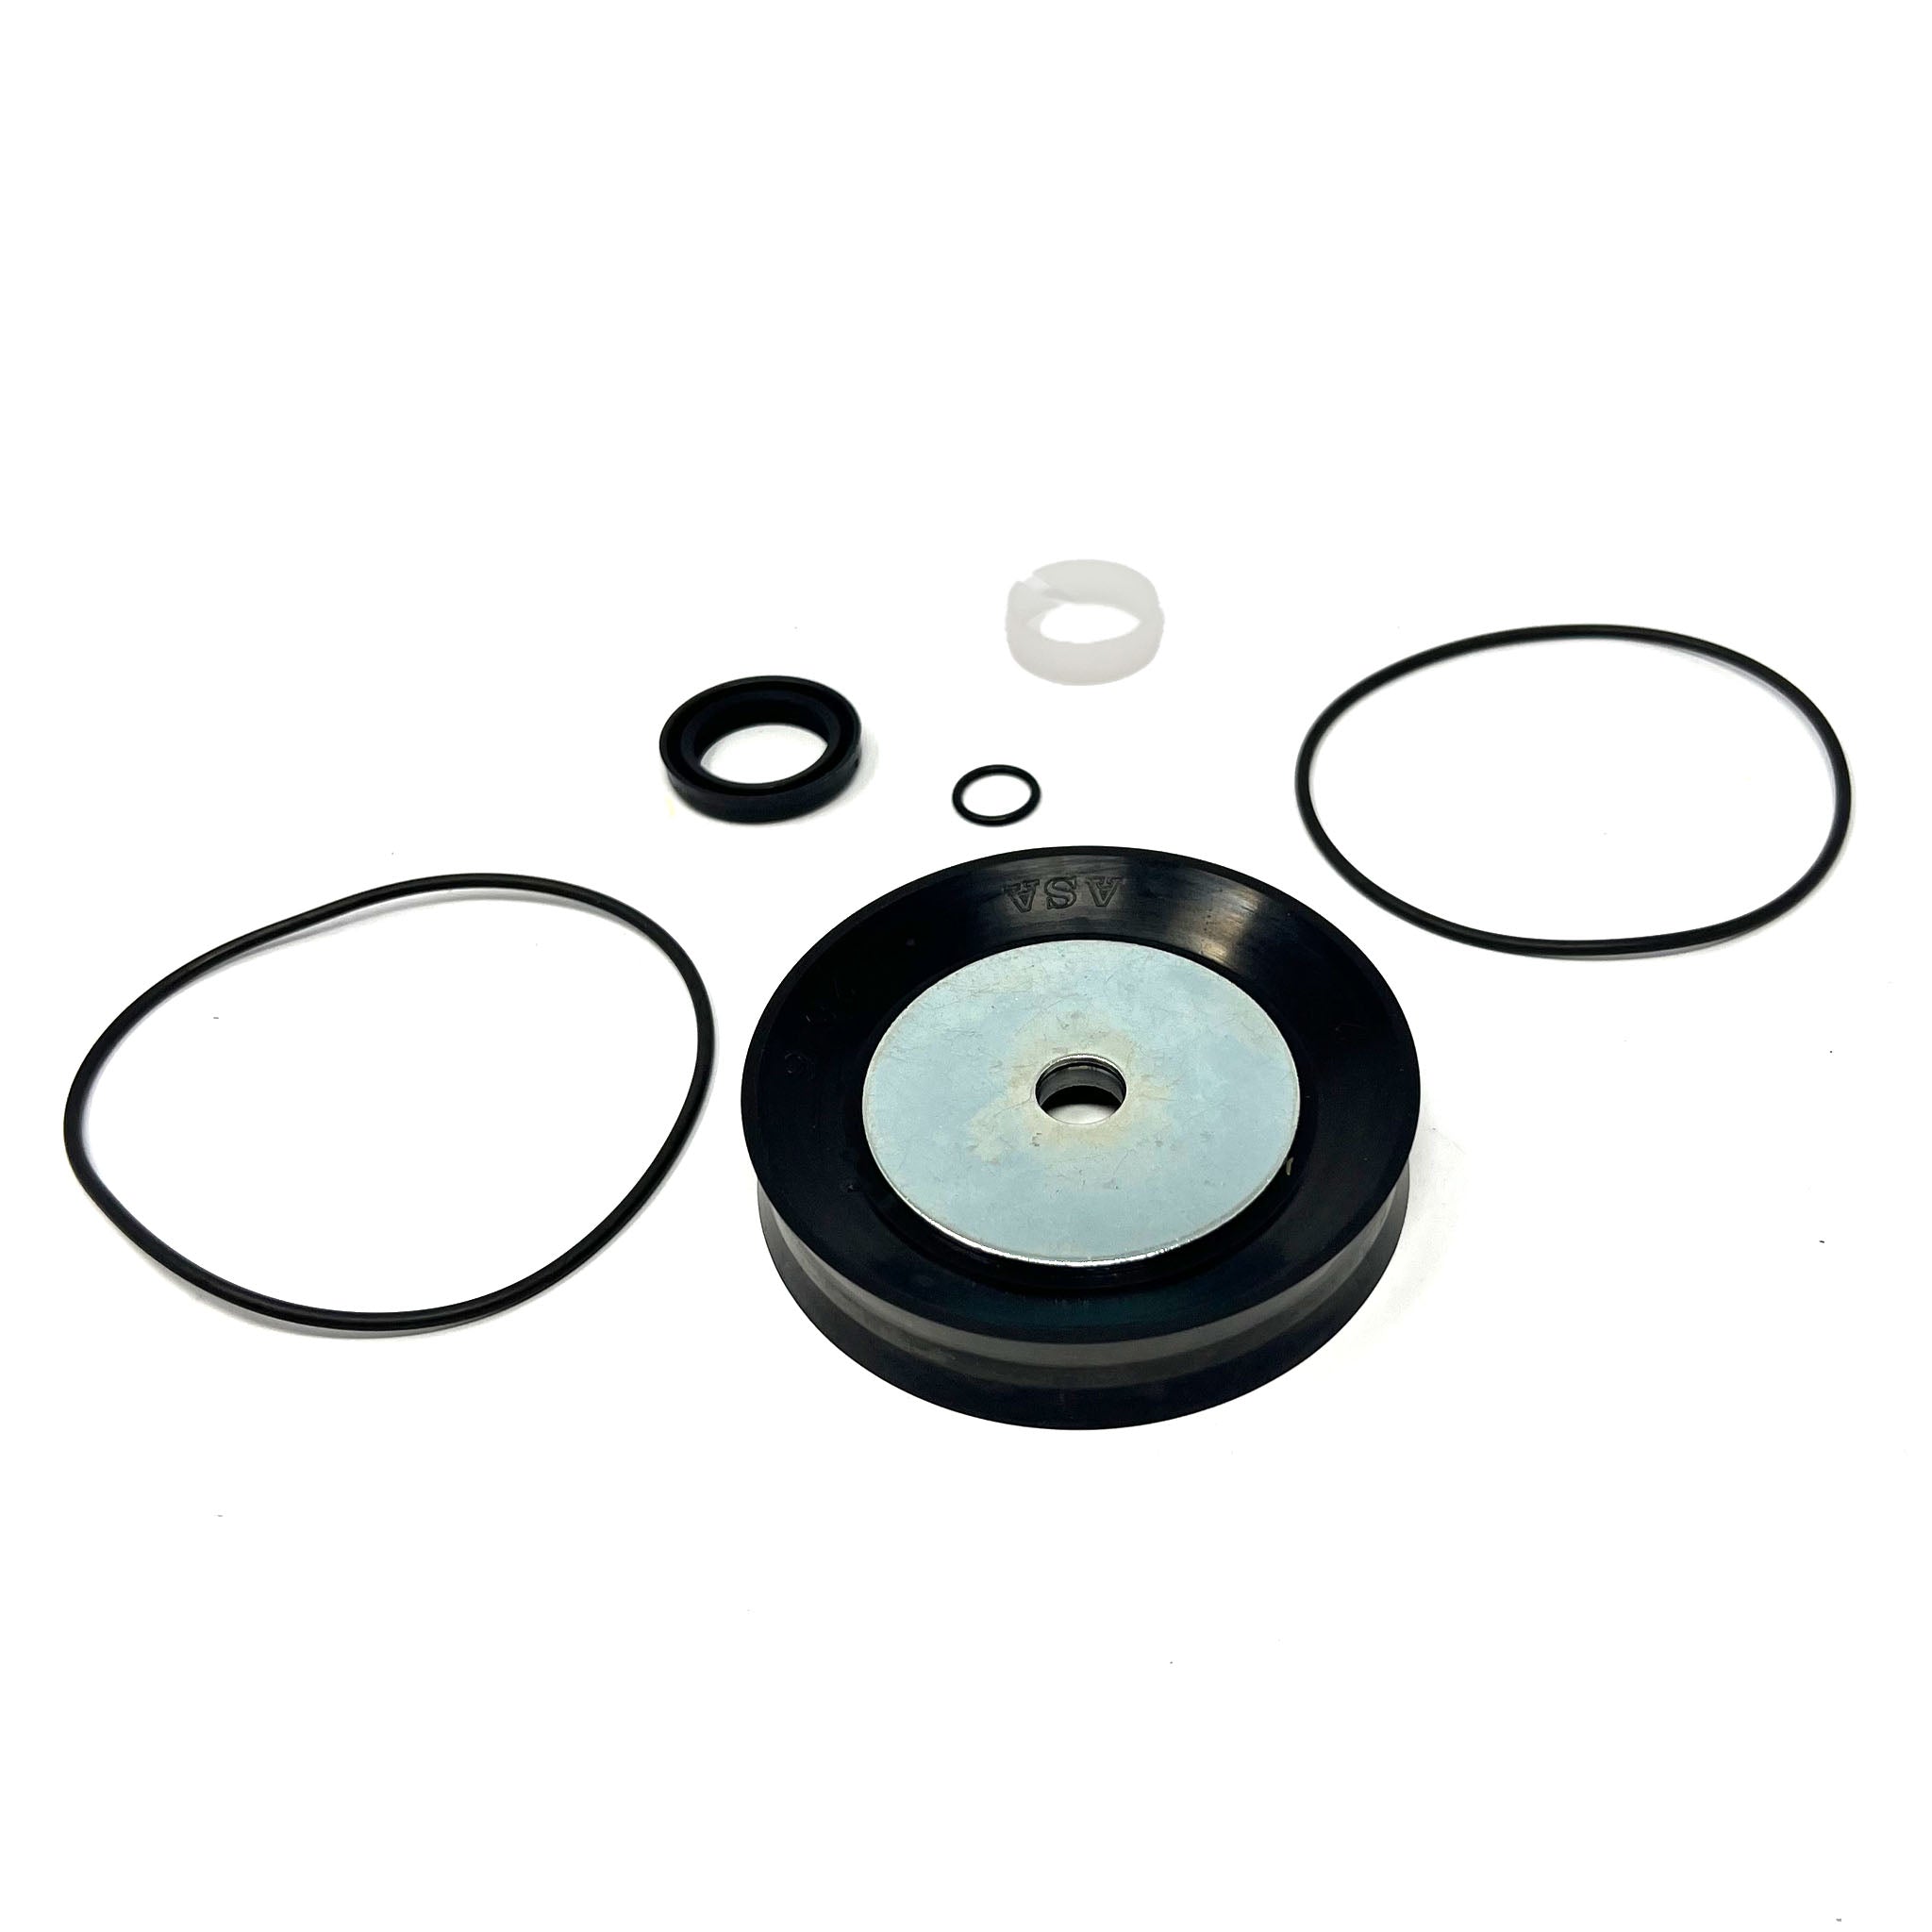 Table Top Cylinder Seal Kit for Coats 5030, 5060 or 5070